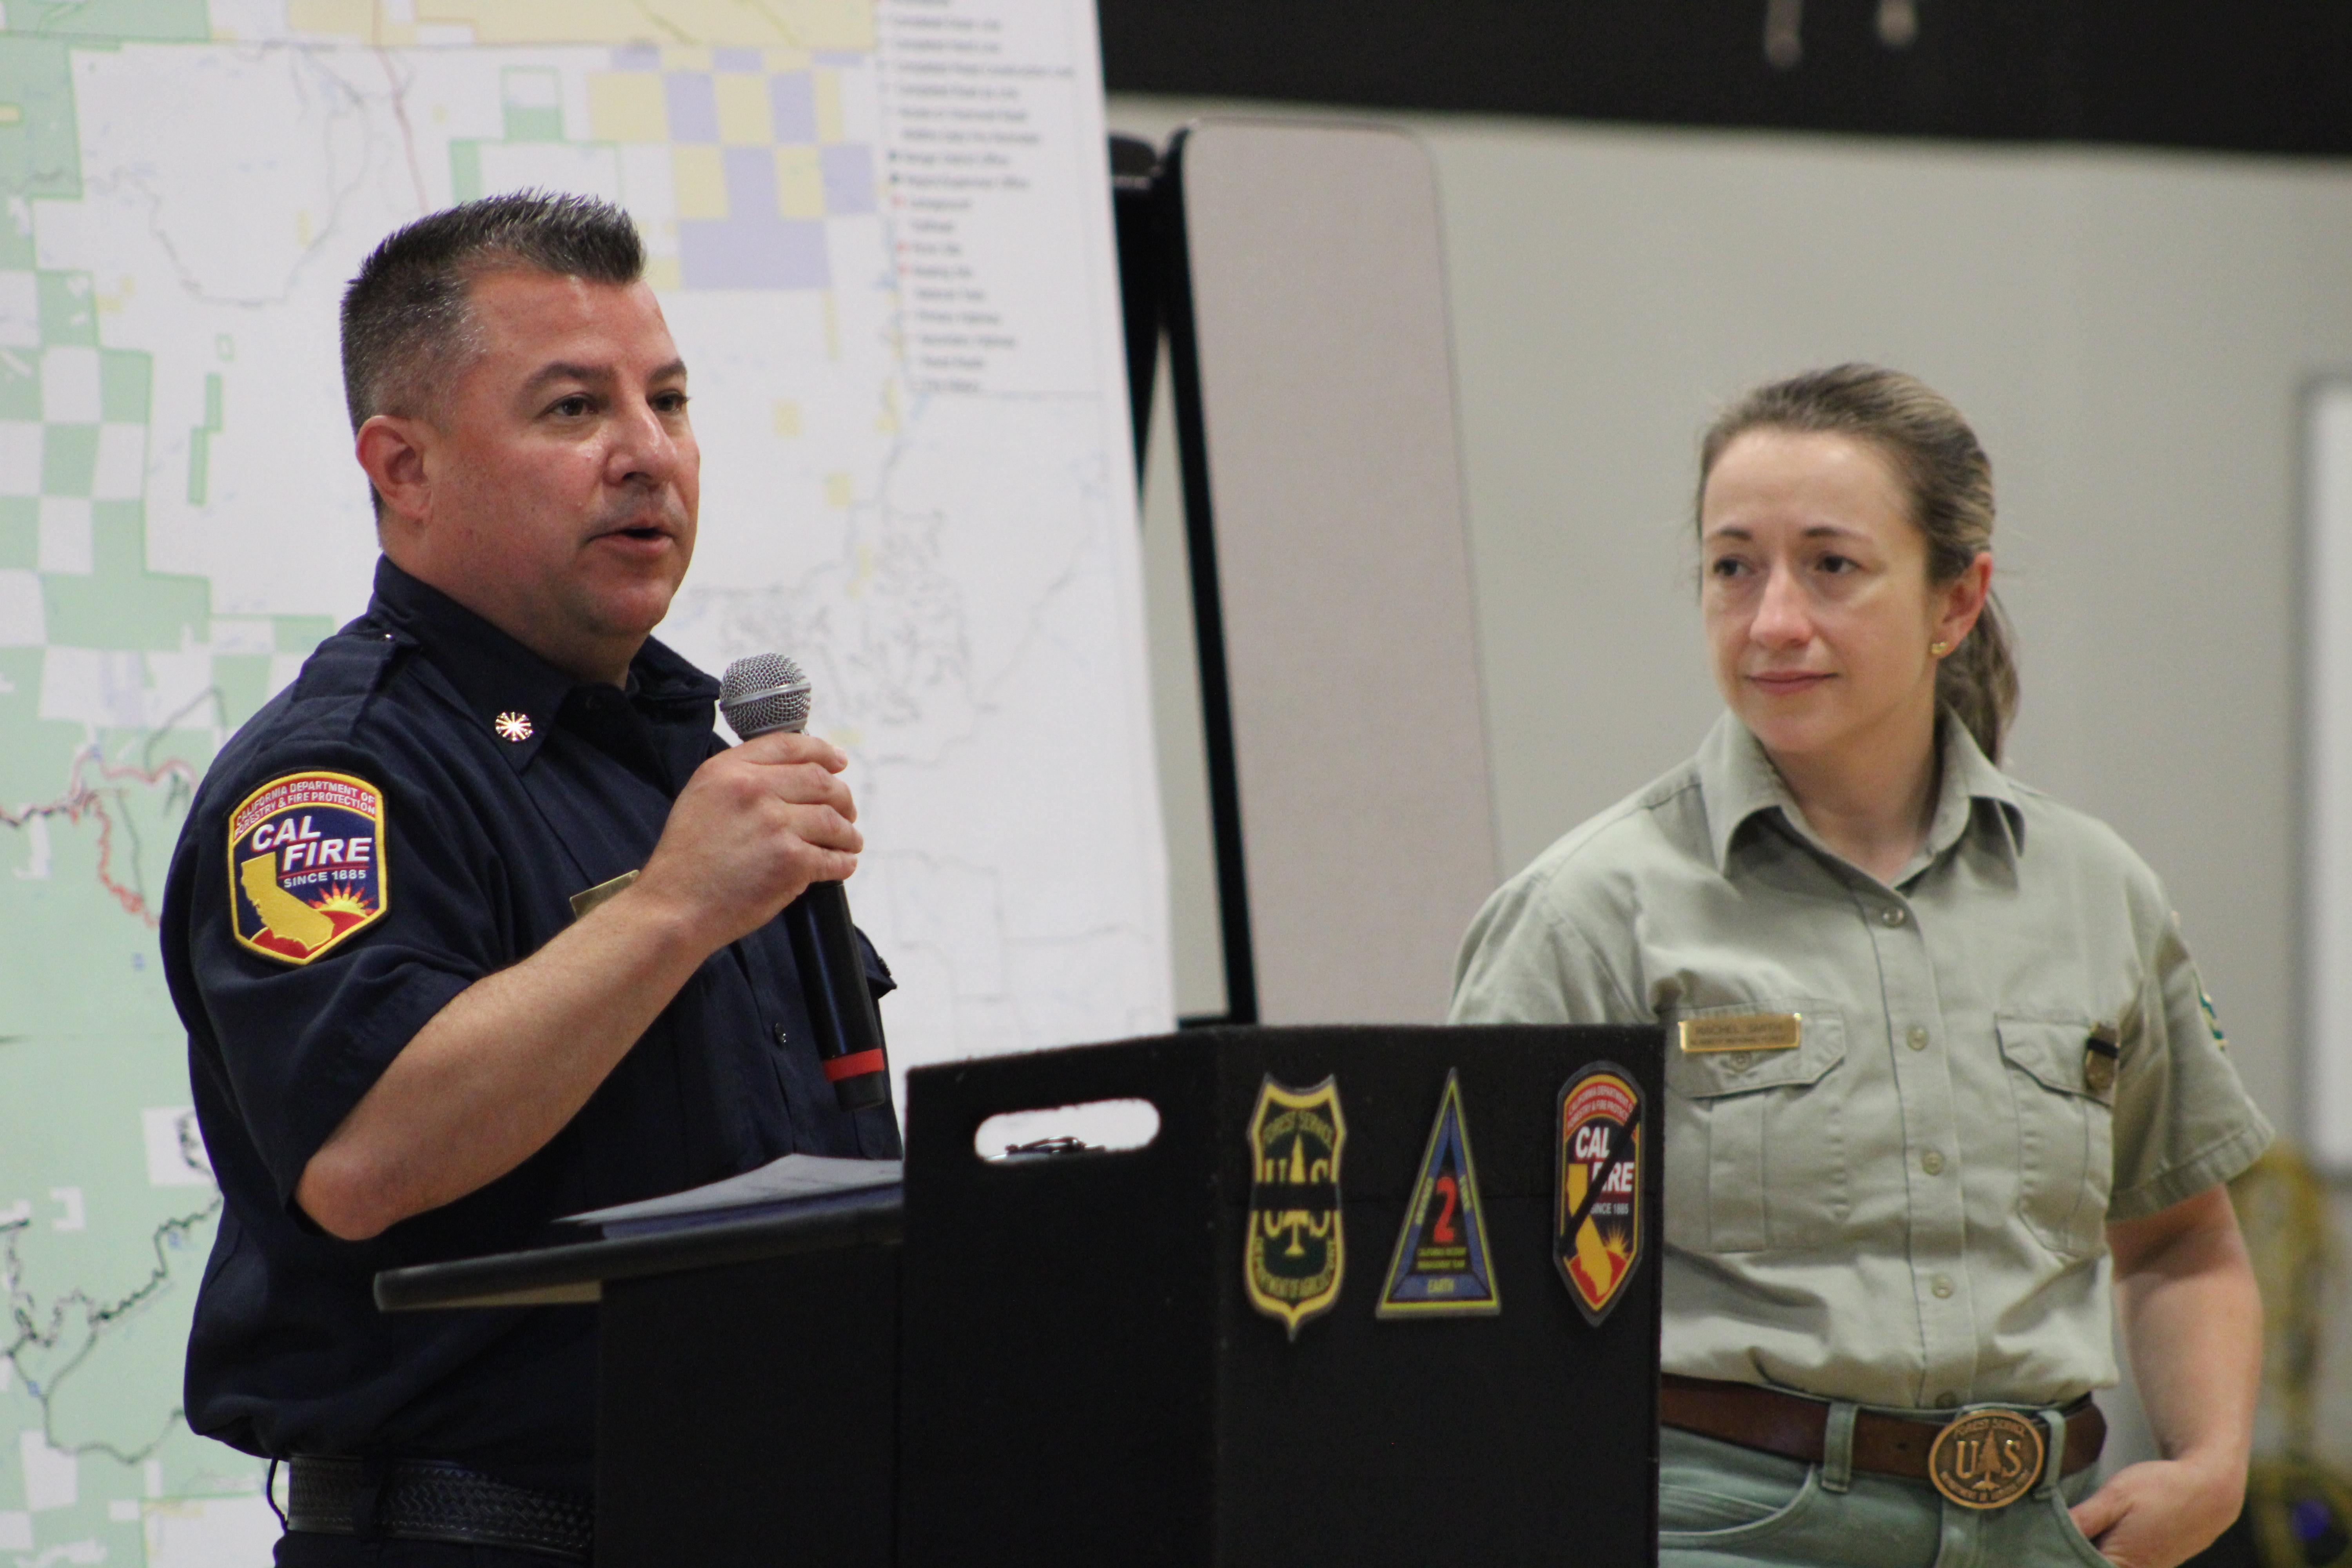 Cal Fire Unit Chief Phil Anzo and Klamath National Forest Supervisor Rachel Smith at the Yreka community meeting